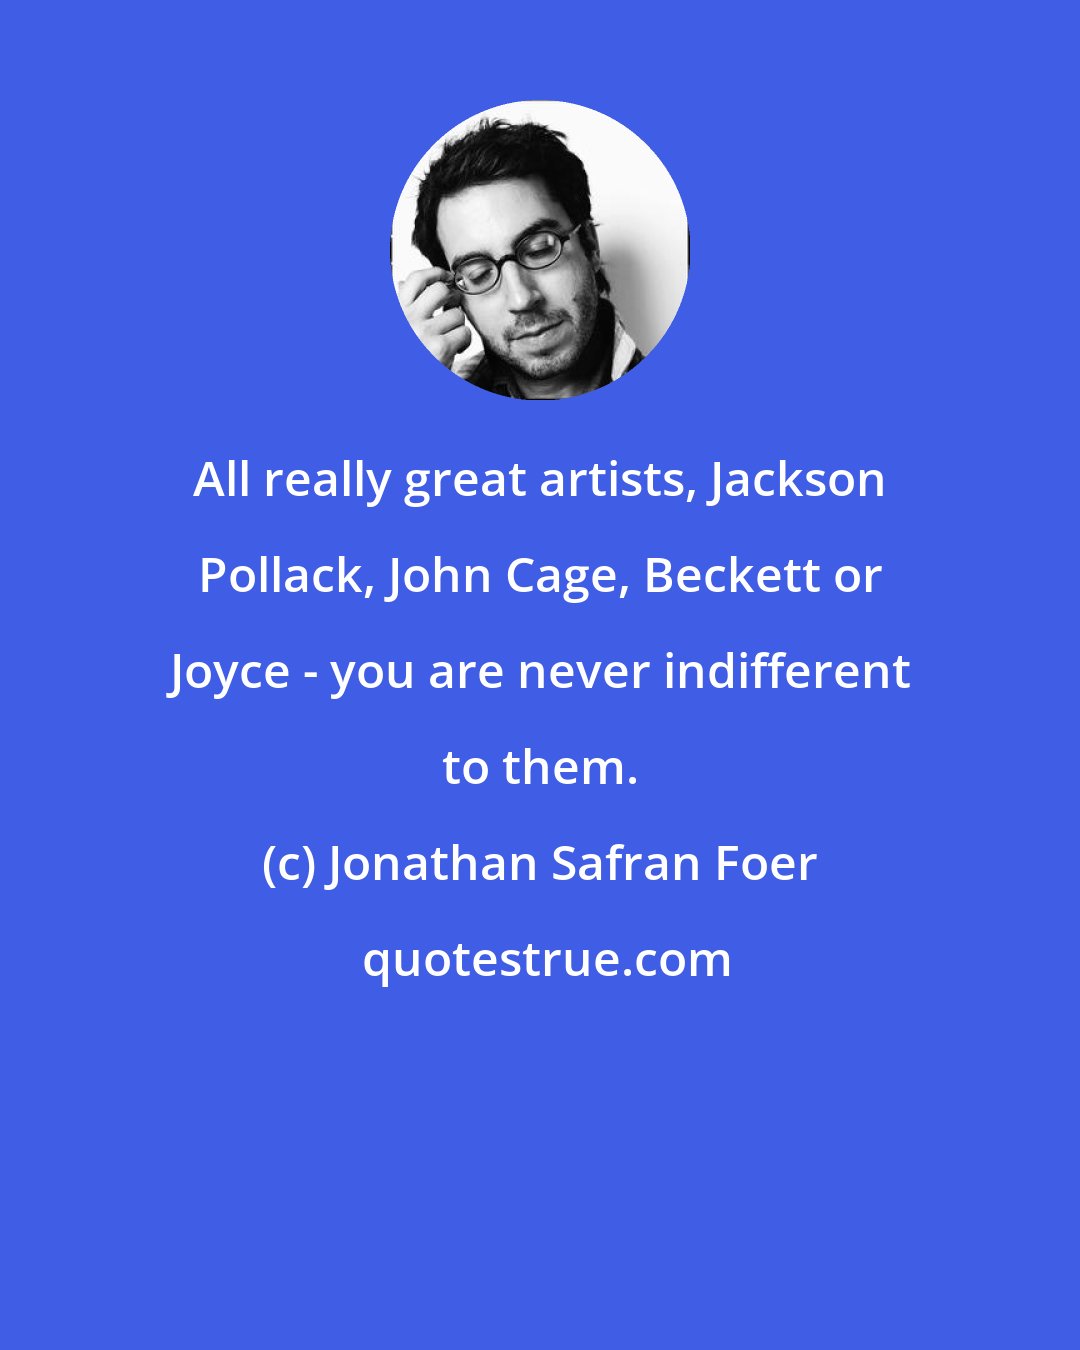 Jonathan Safran Foer: All really great artists, Jackson Pollack, John Cage, Beckett or Joyce - you are never indifferent to them.